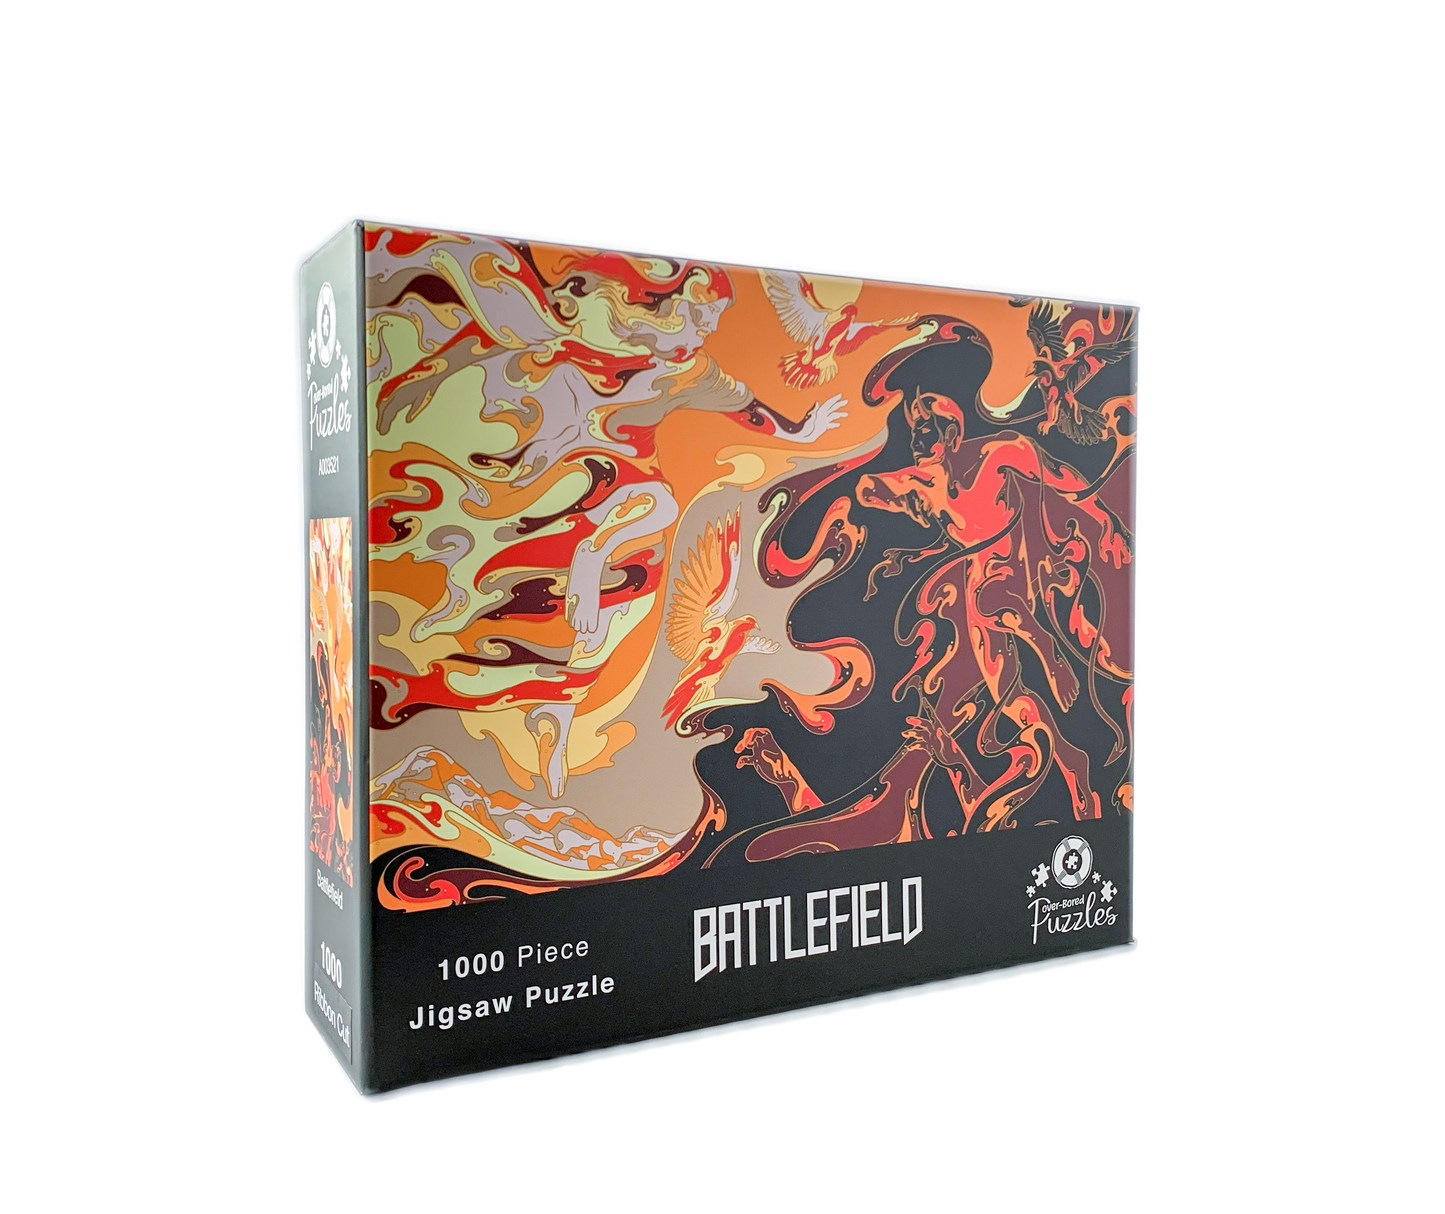 Over-Bored Puzzles: Battlefield